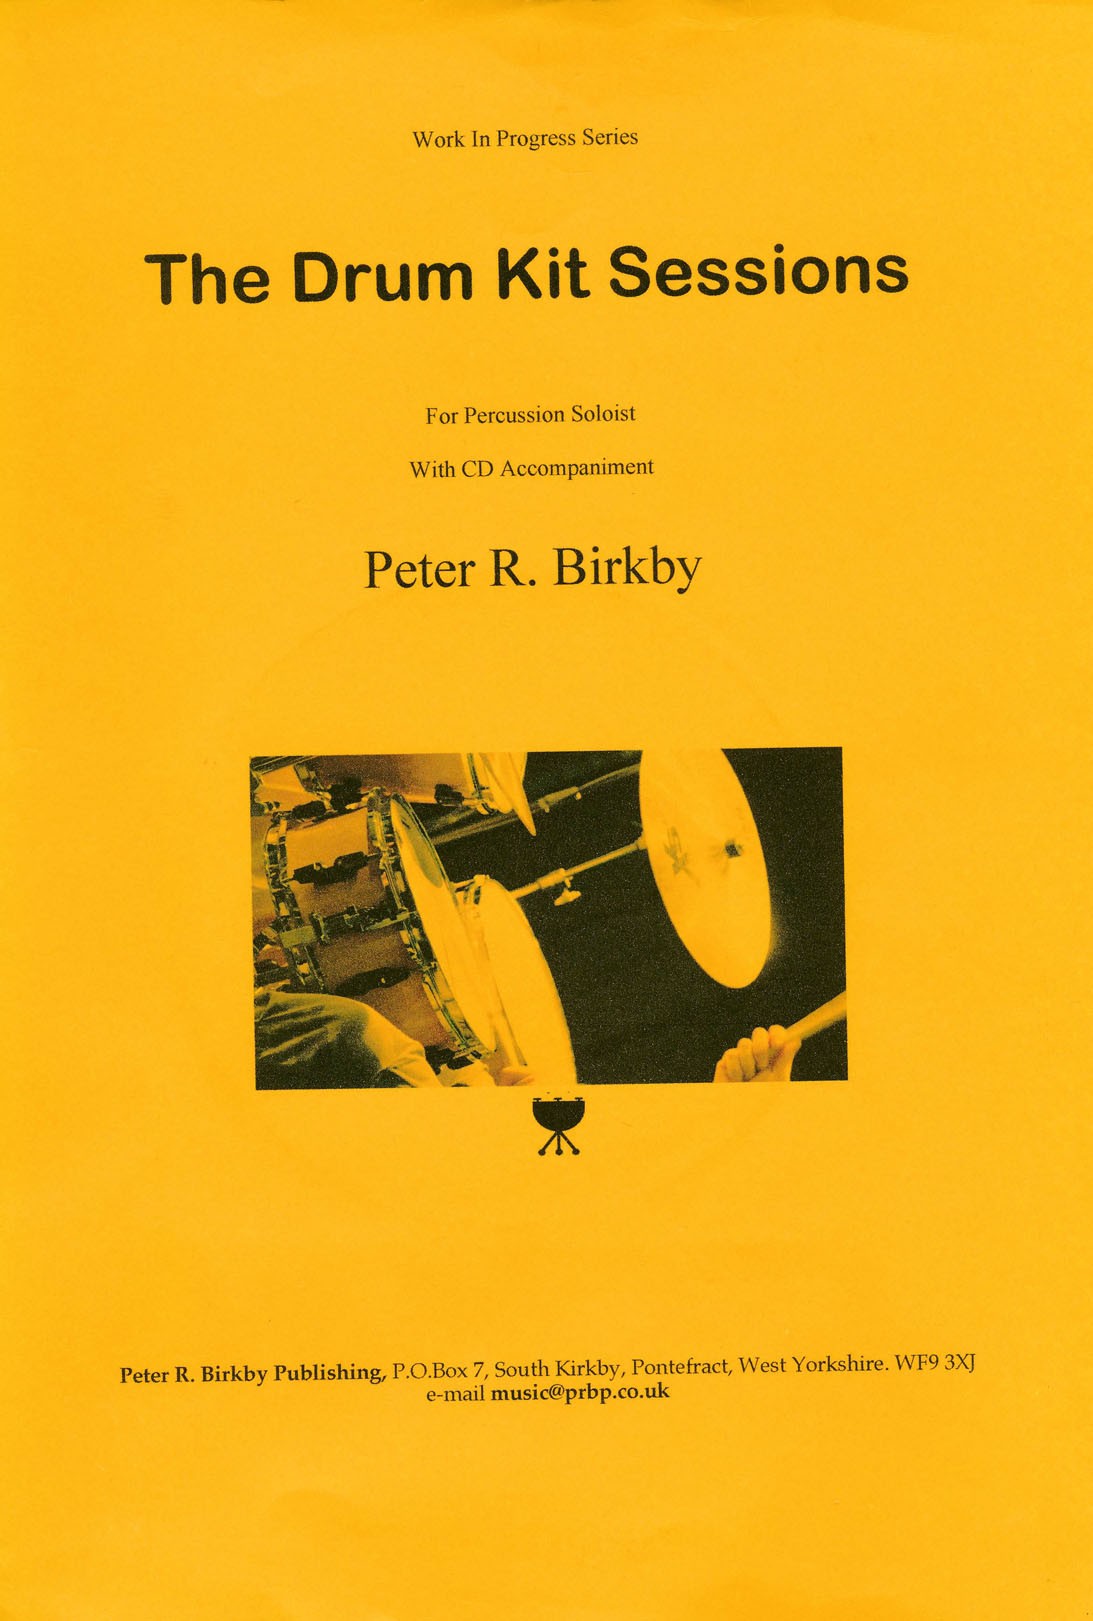 The Drum Kit Sessions